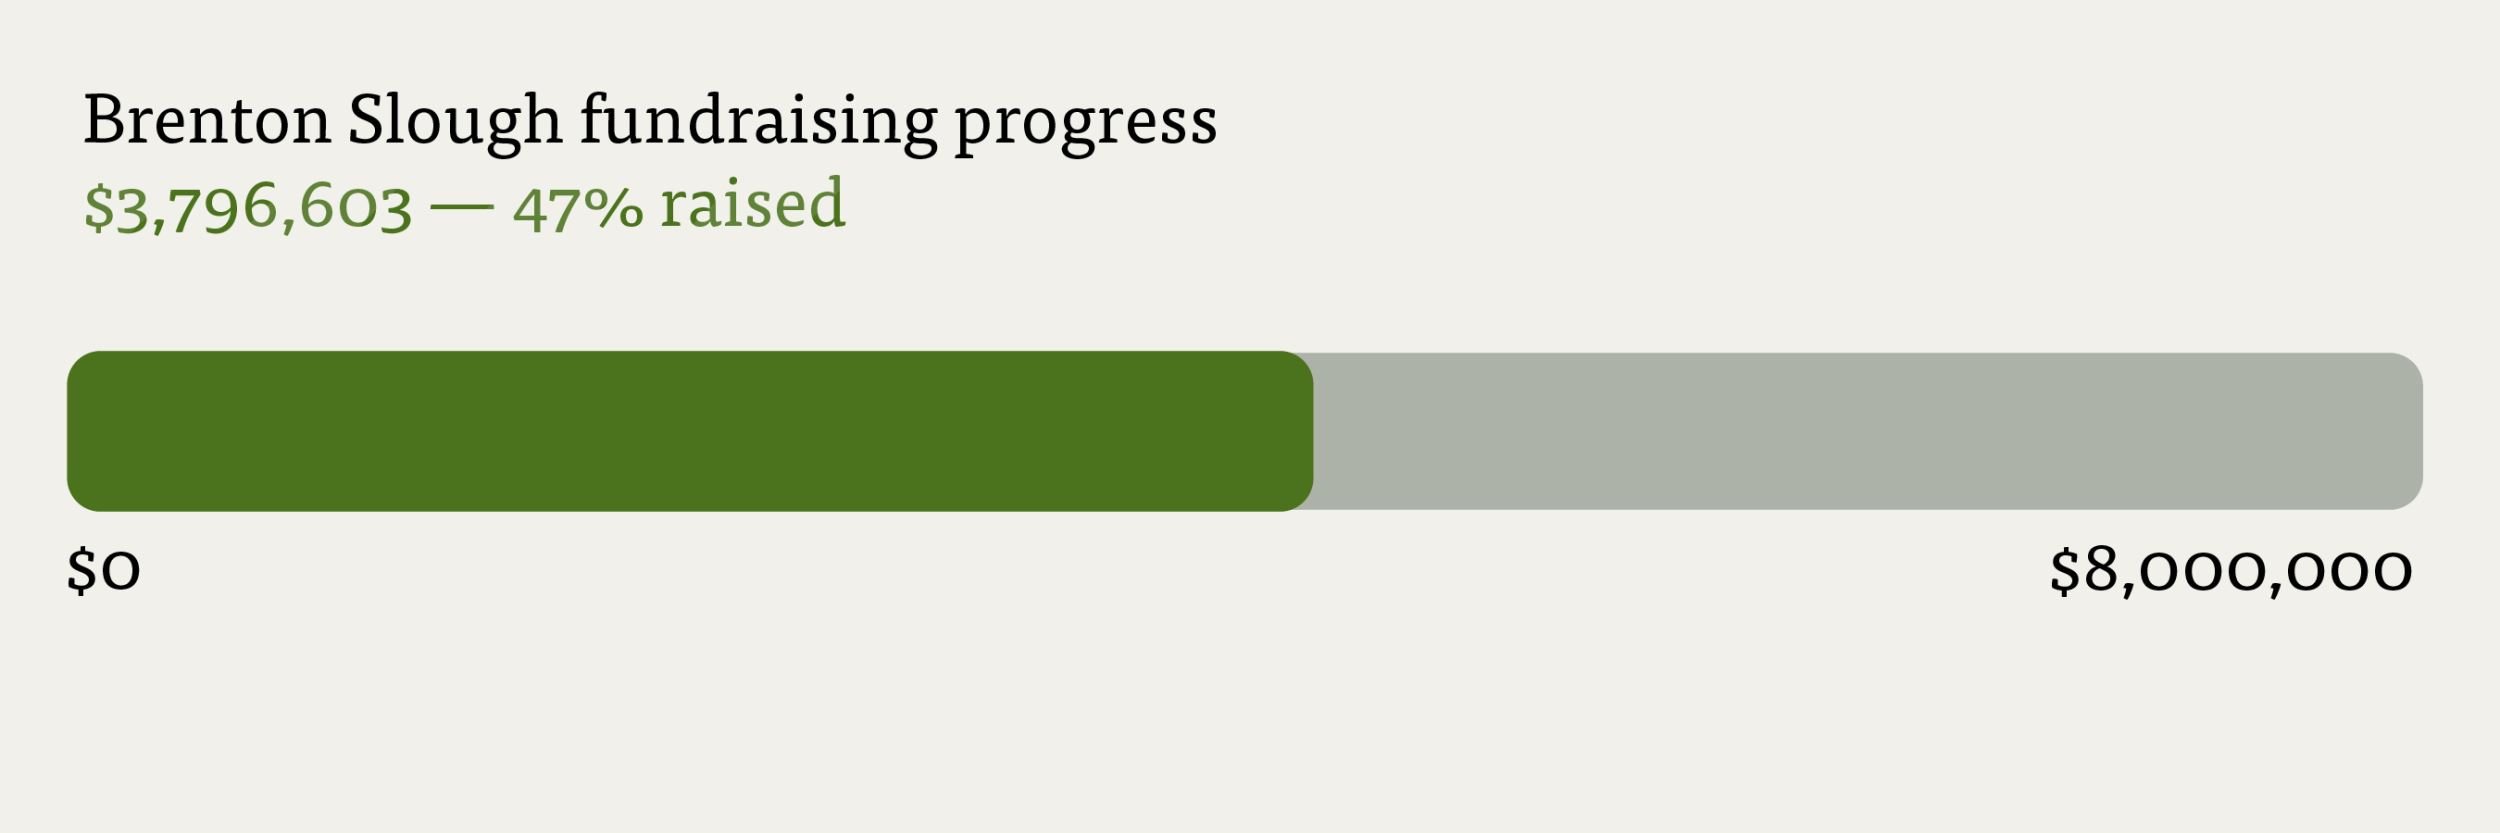 Progress bar showing 47% of funds raised